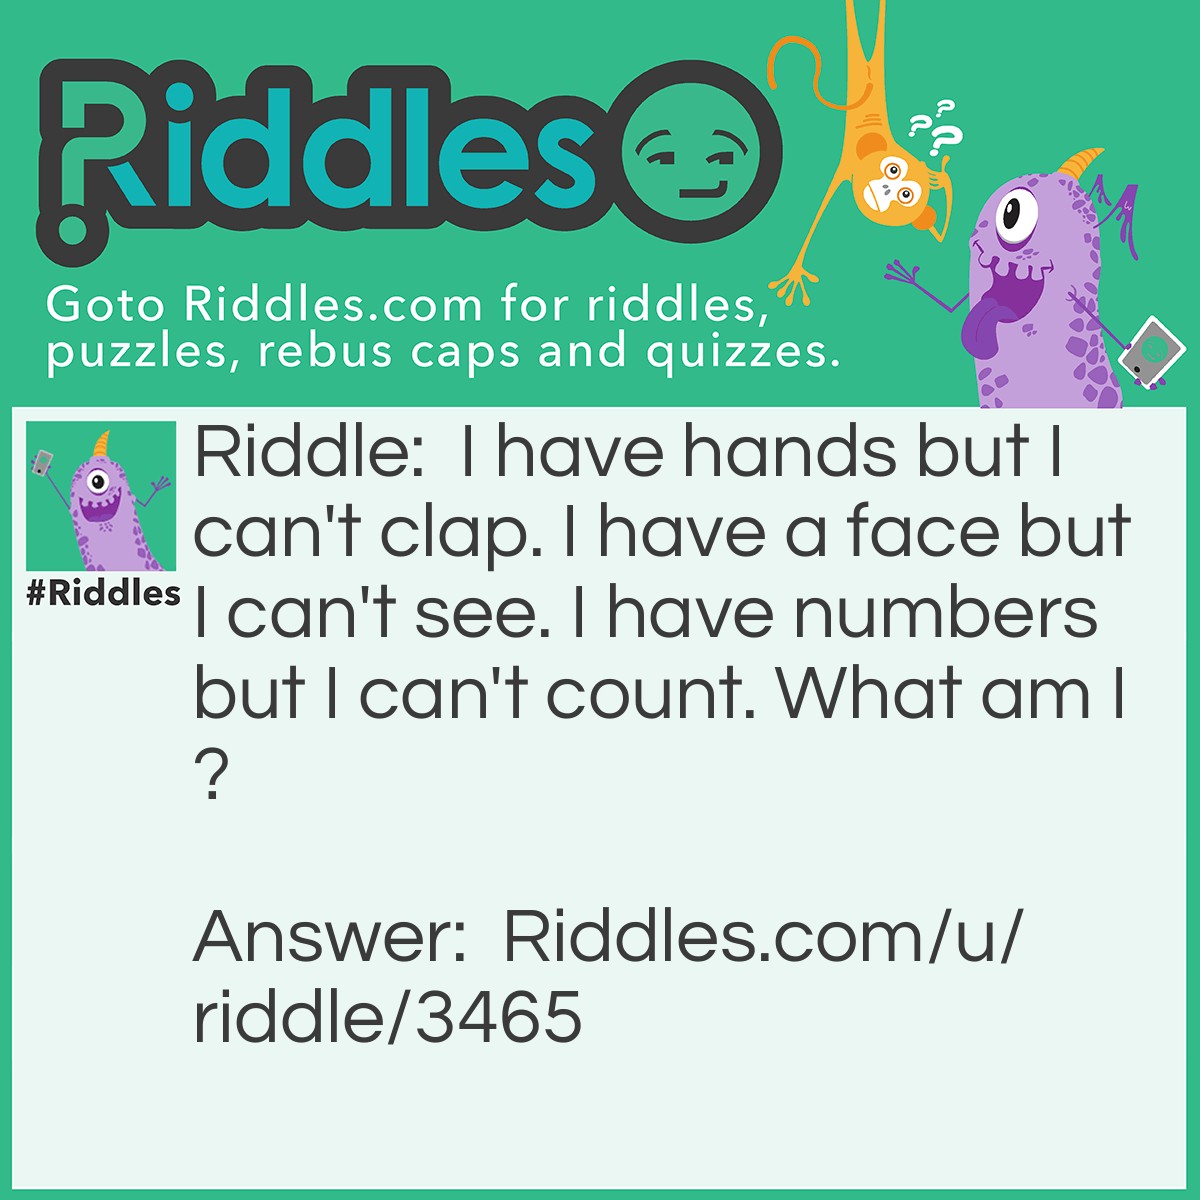 Riddle: I have hands but I can't clap. I have a face but I can't see. I have numbers but I can't count. What am I? Answer: A clock.